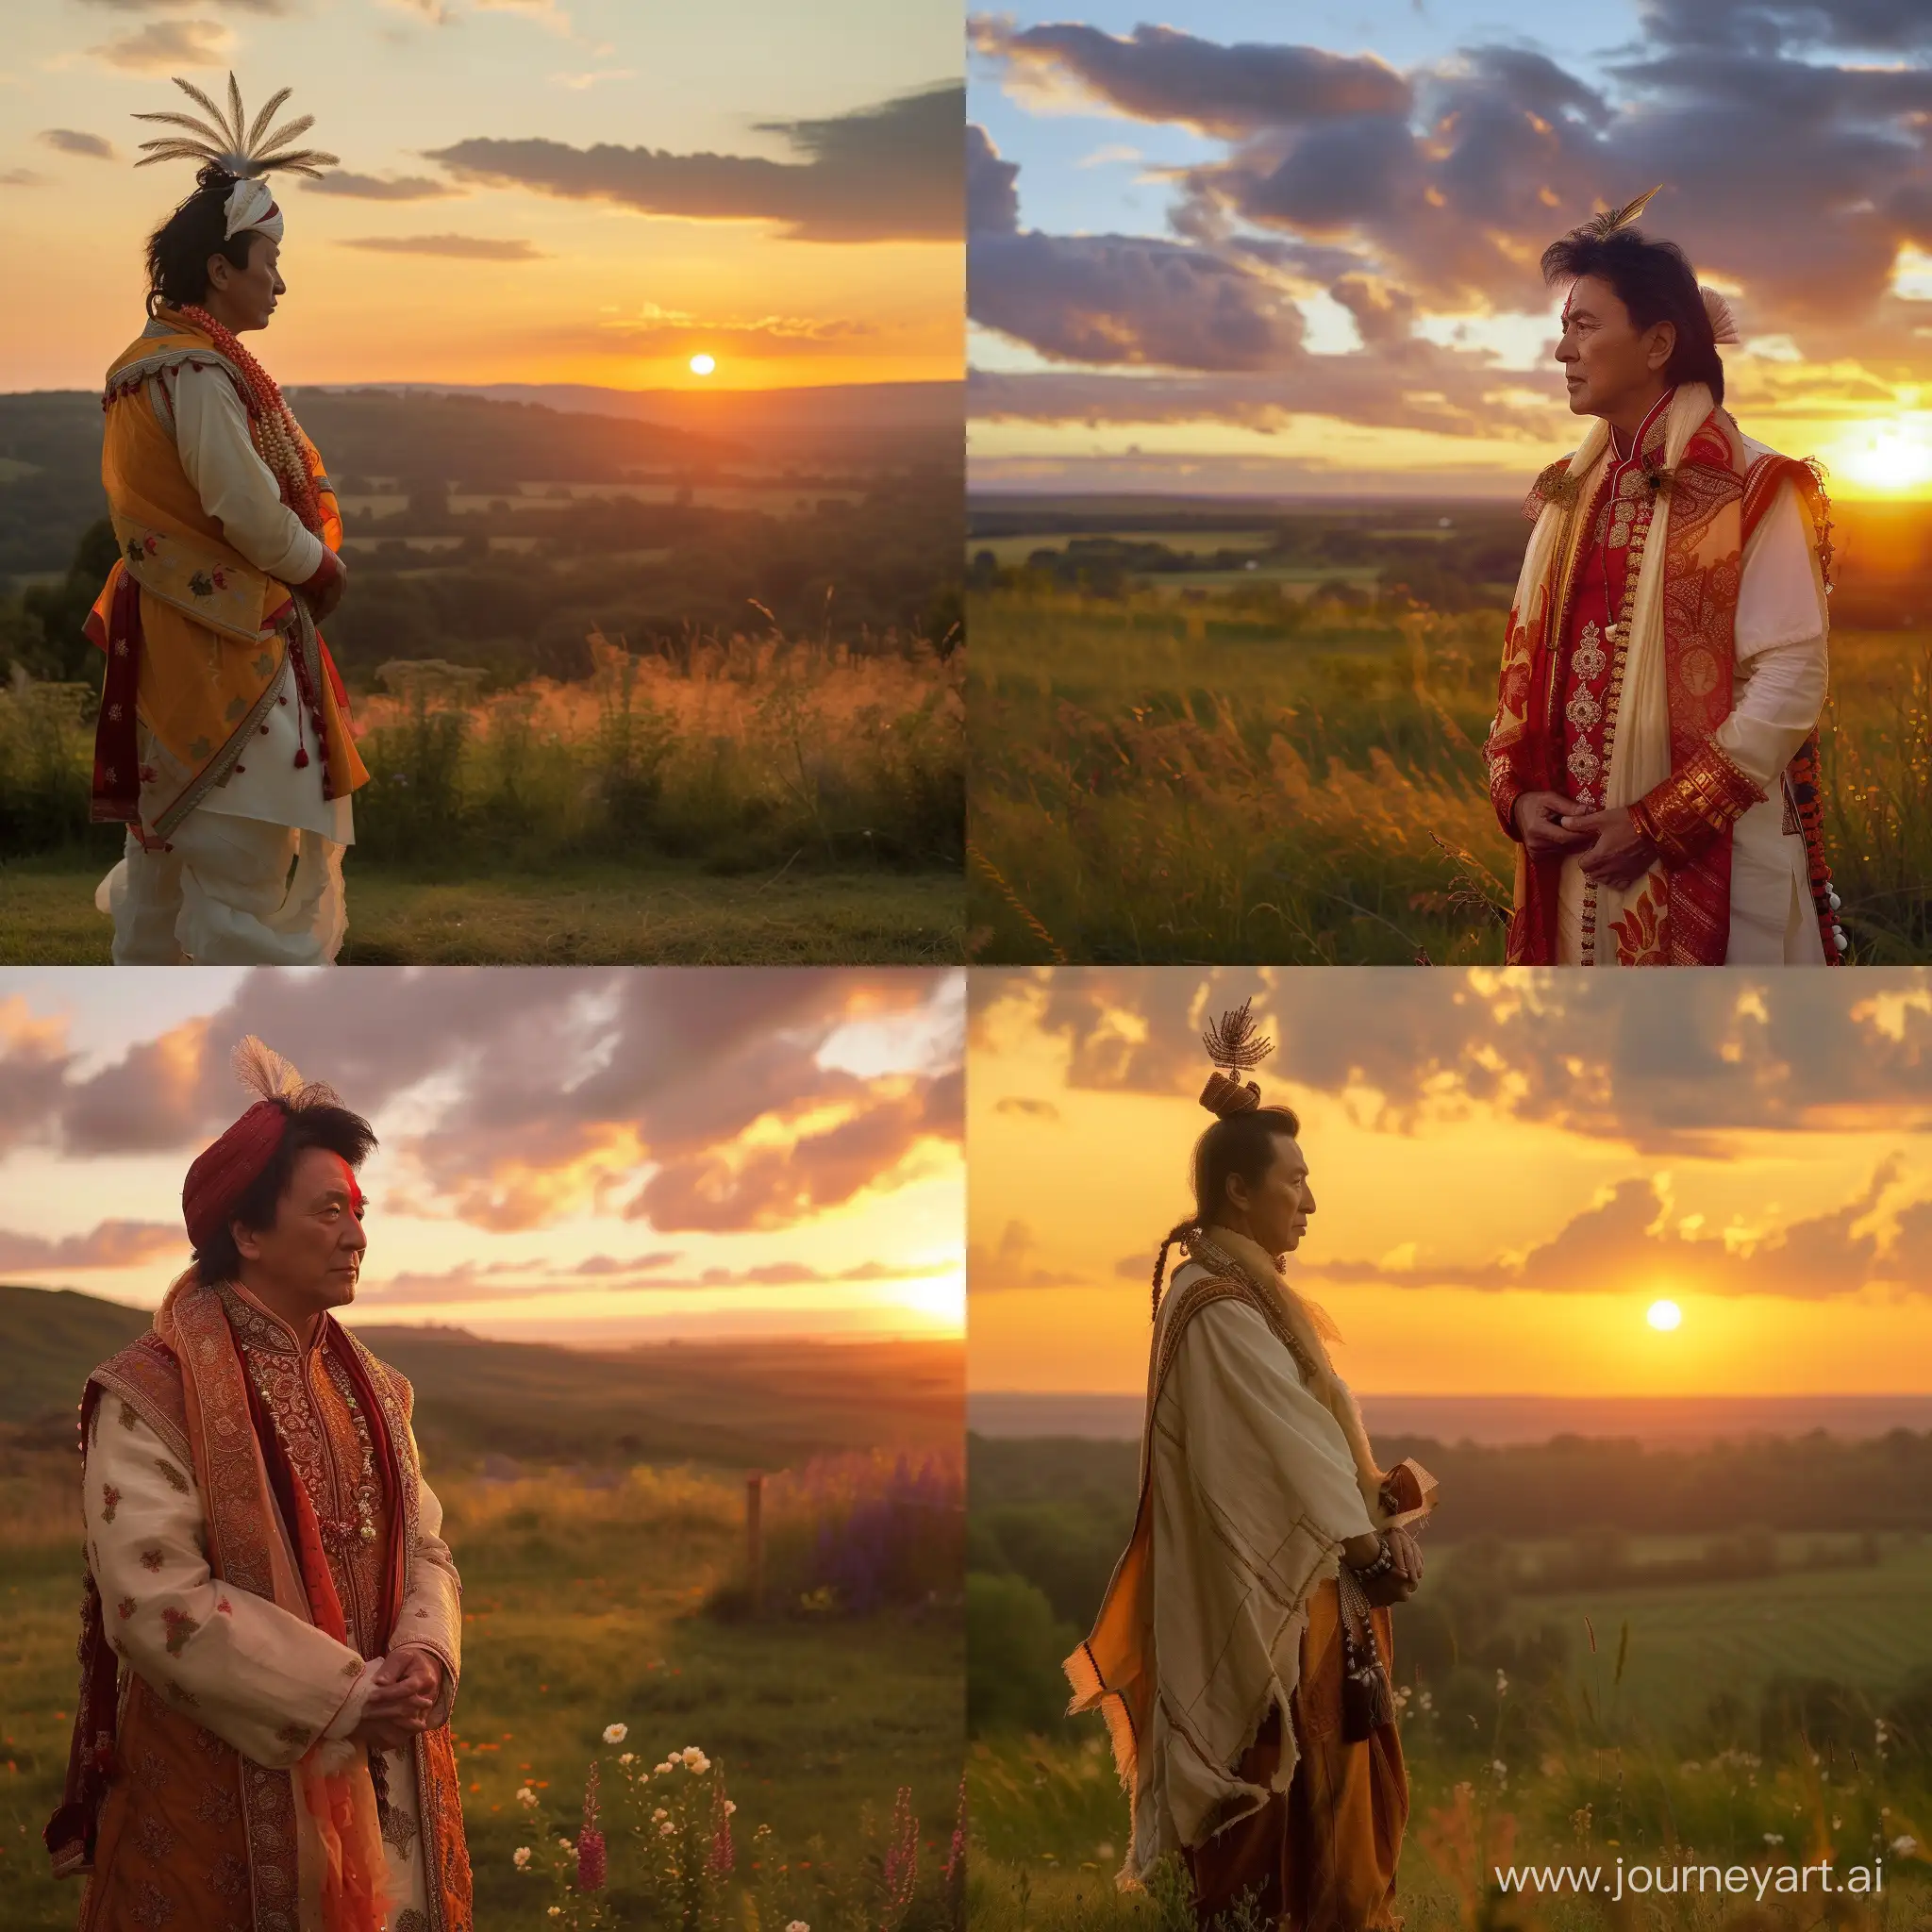 Jacky Chan in indian costume stand at a meadow watching the sunset